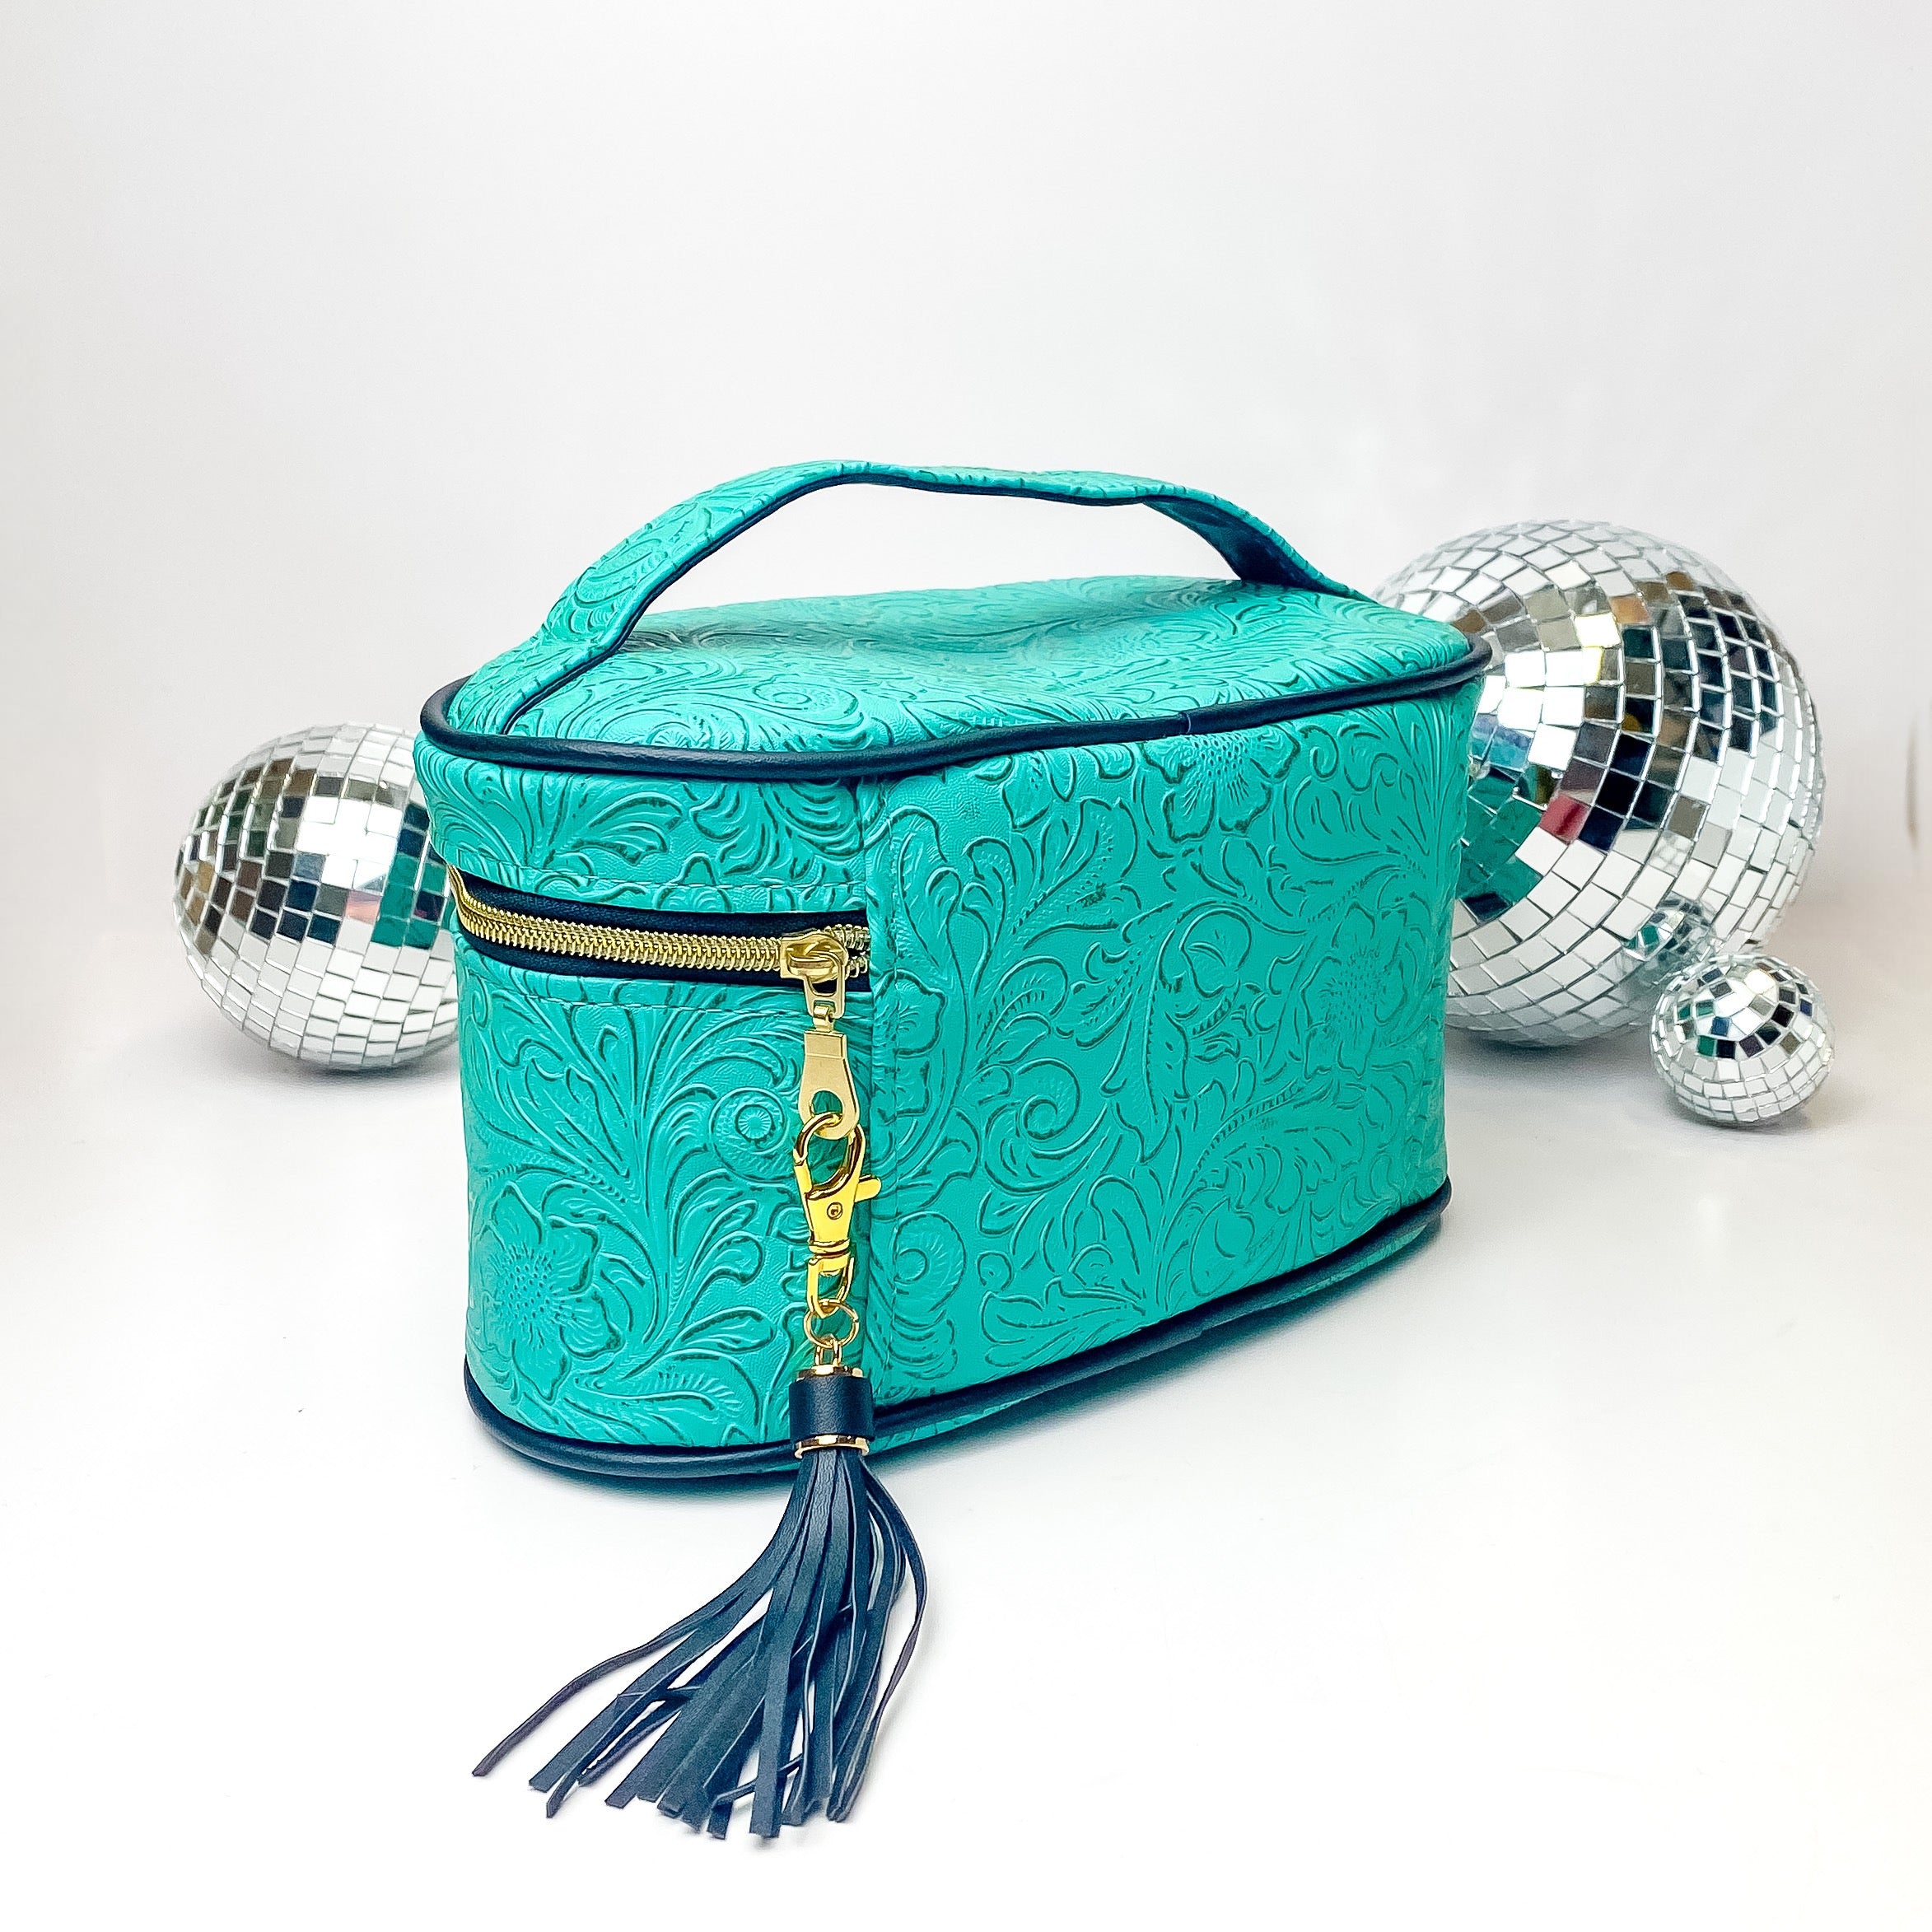 Makeup Junkie | Medium Turquoise Dream Train Case in Turquoise Green Tooled Print